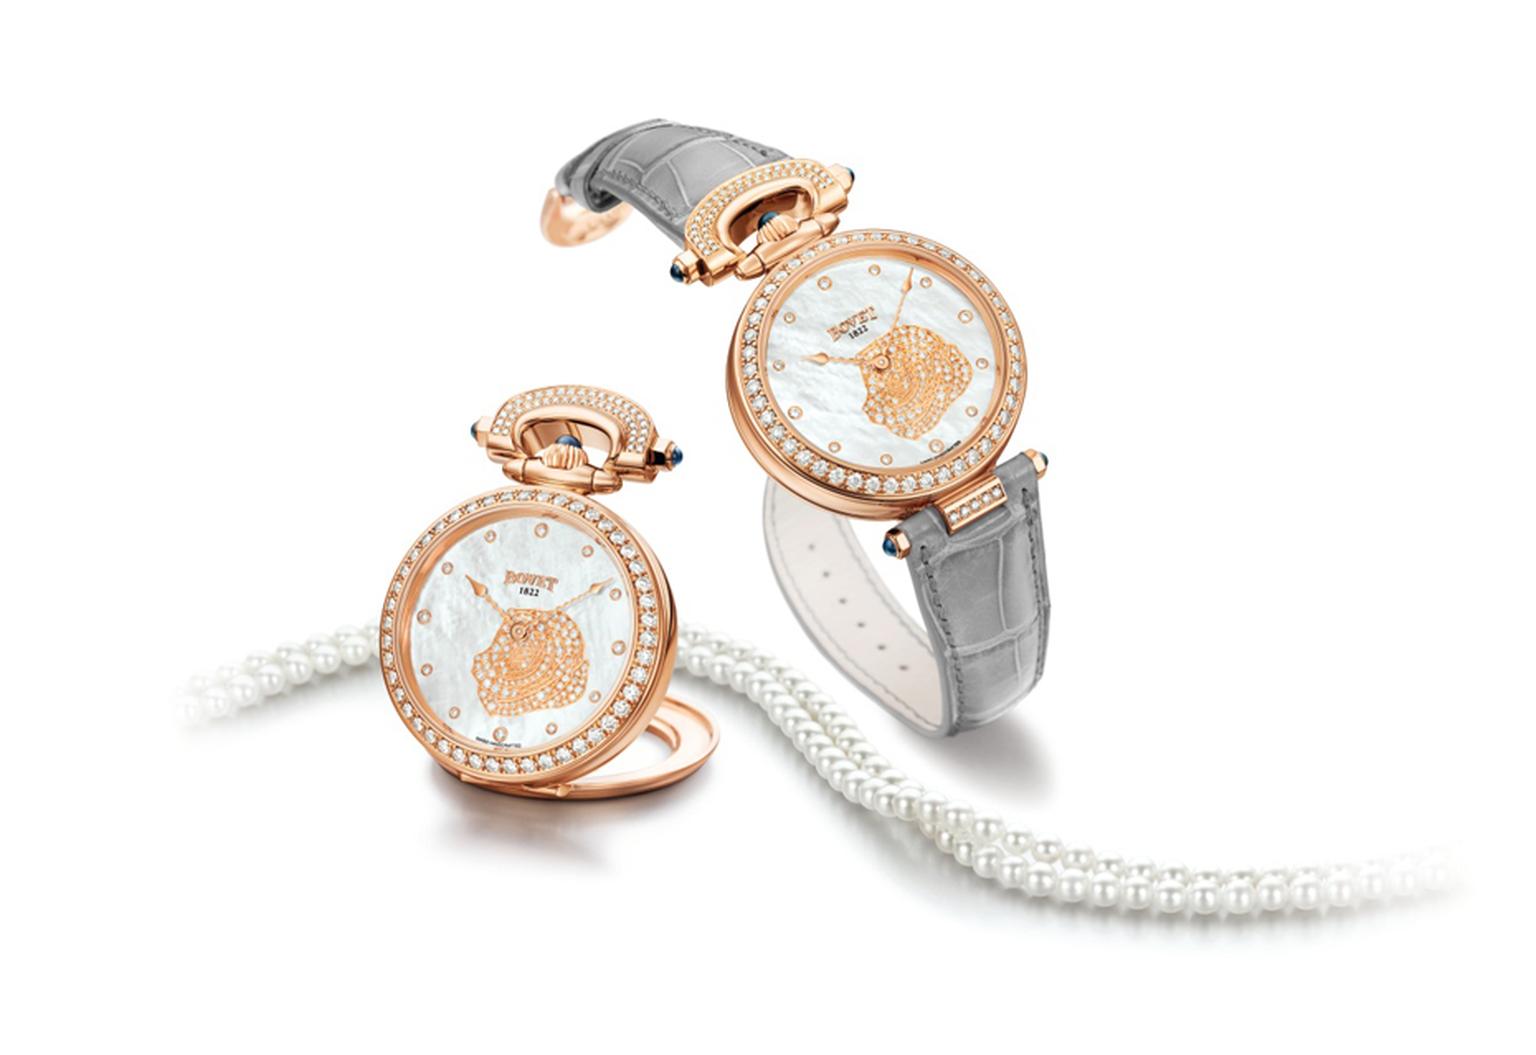 Bovet's Amadeo® Fleurier 39 Rose from the 2013 collection features a mother-of-pearl dial and pearl necklace.